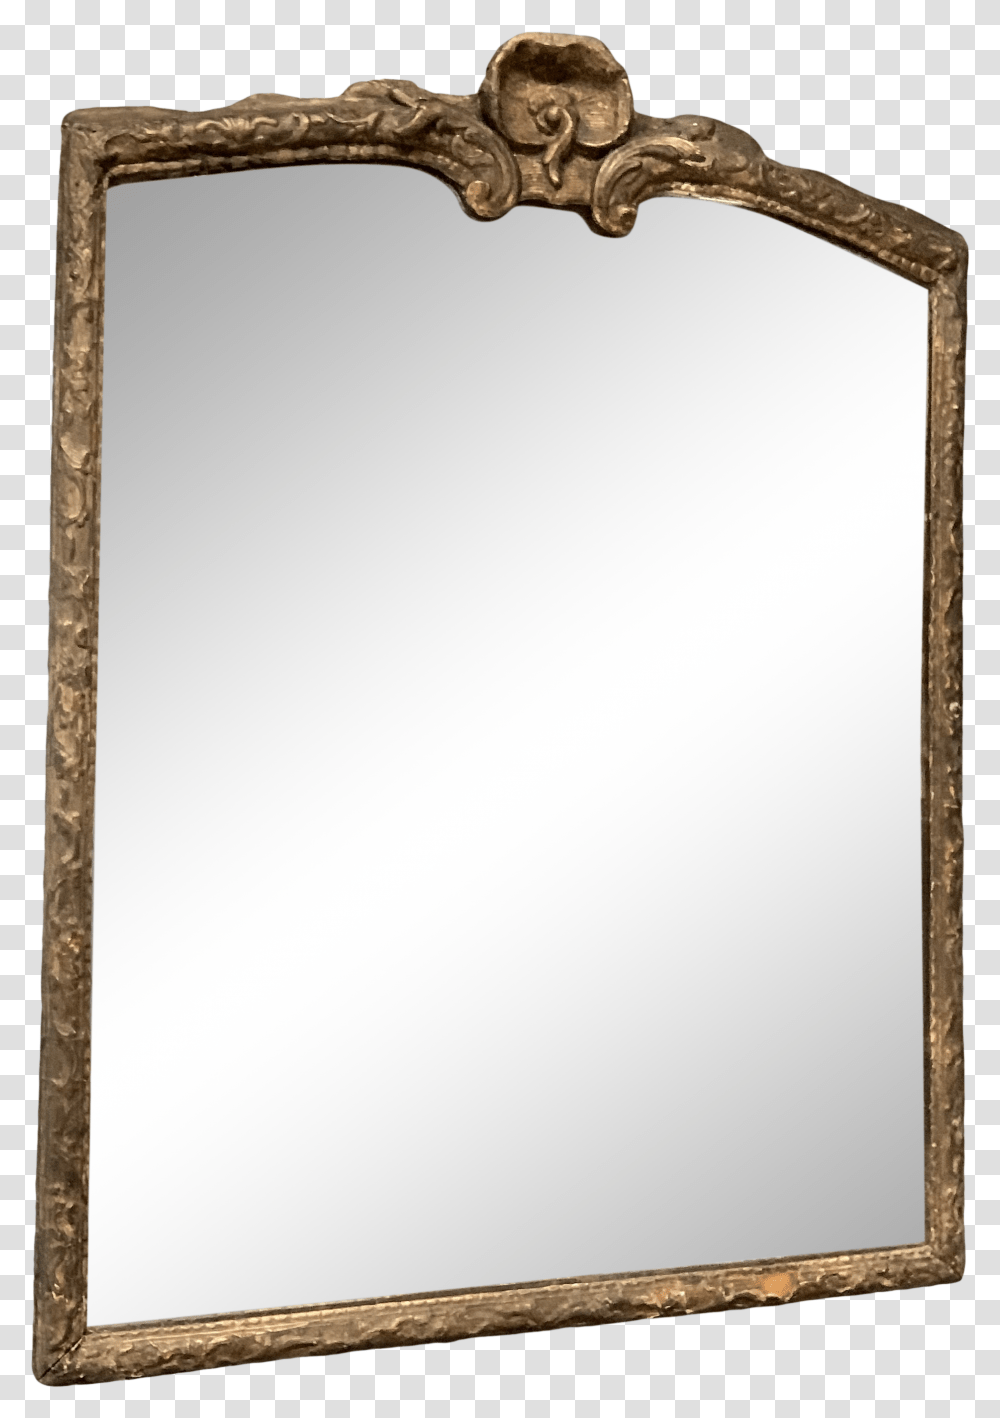 Antique Mirror With Ornate Wood Frame Picture Frame Transparent Png